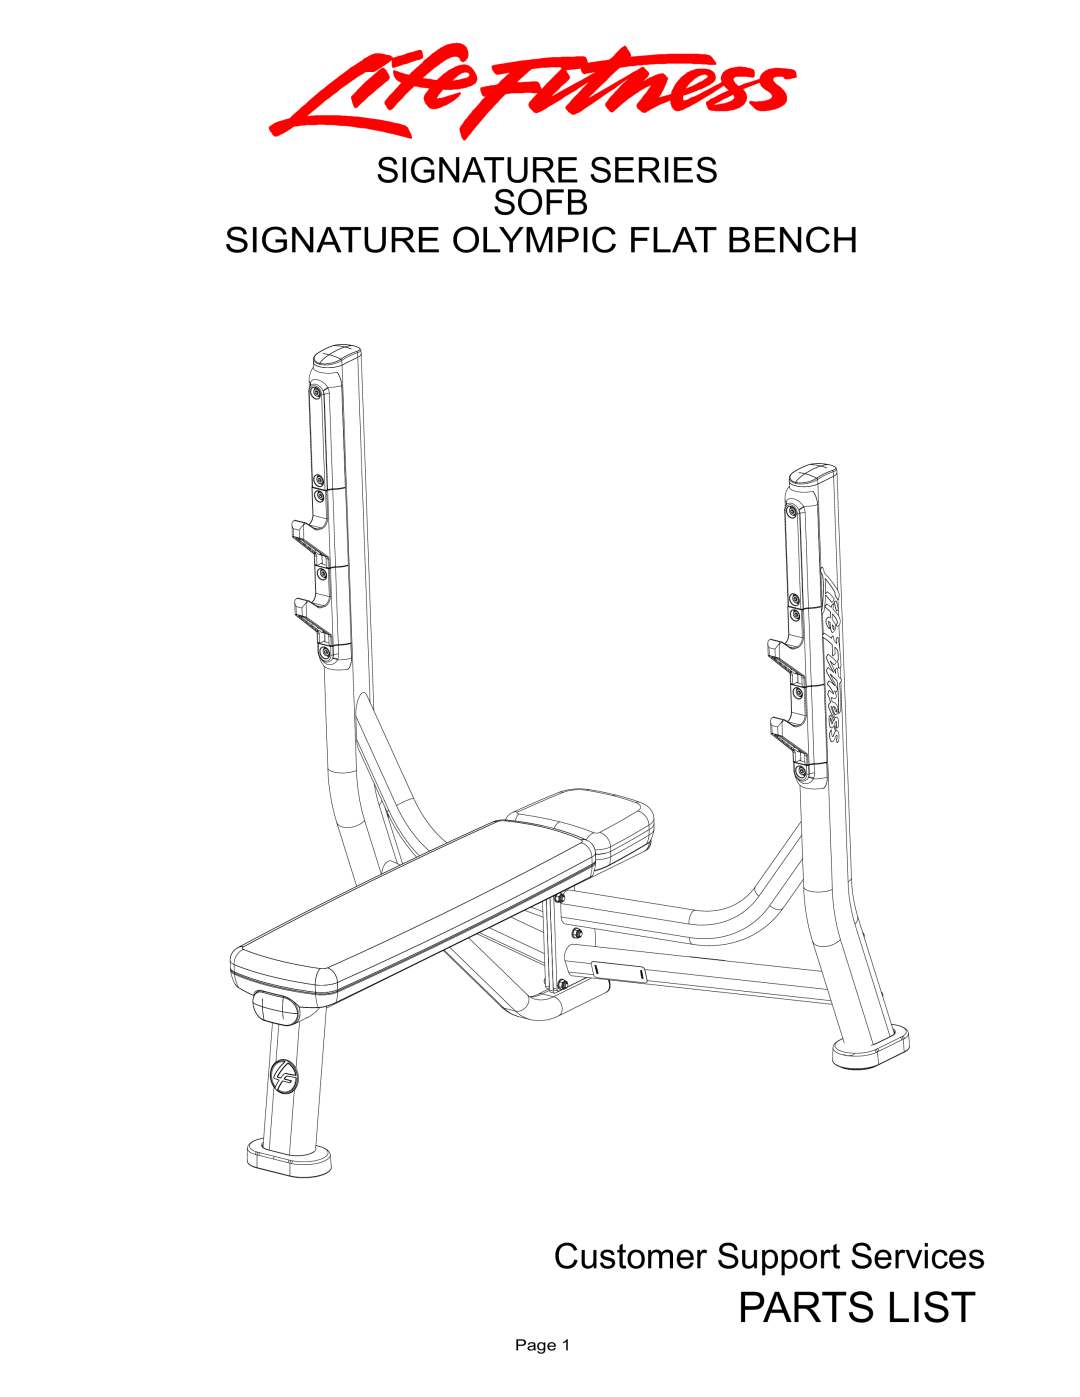 Life Fitness SOFB manual Parts List, Signature Series Sofb Signature Olympic Flat Bench, Customer Support Services, Page 